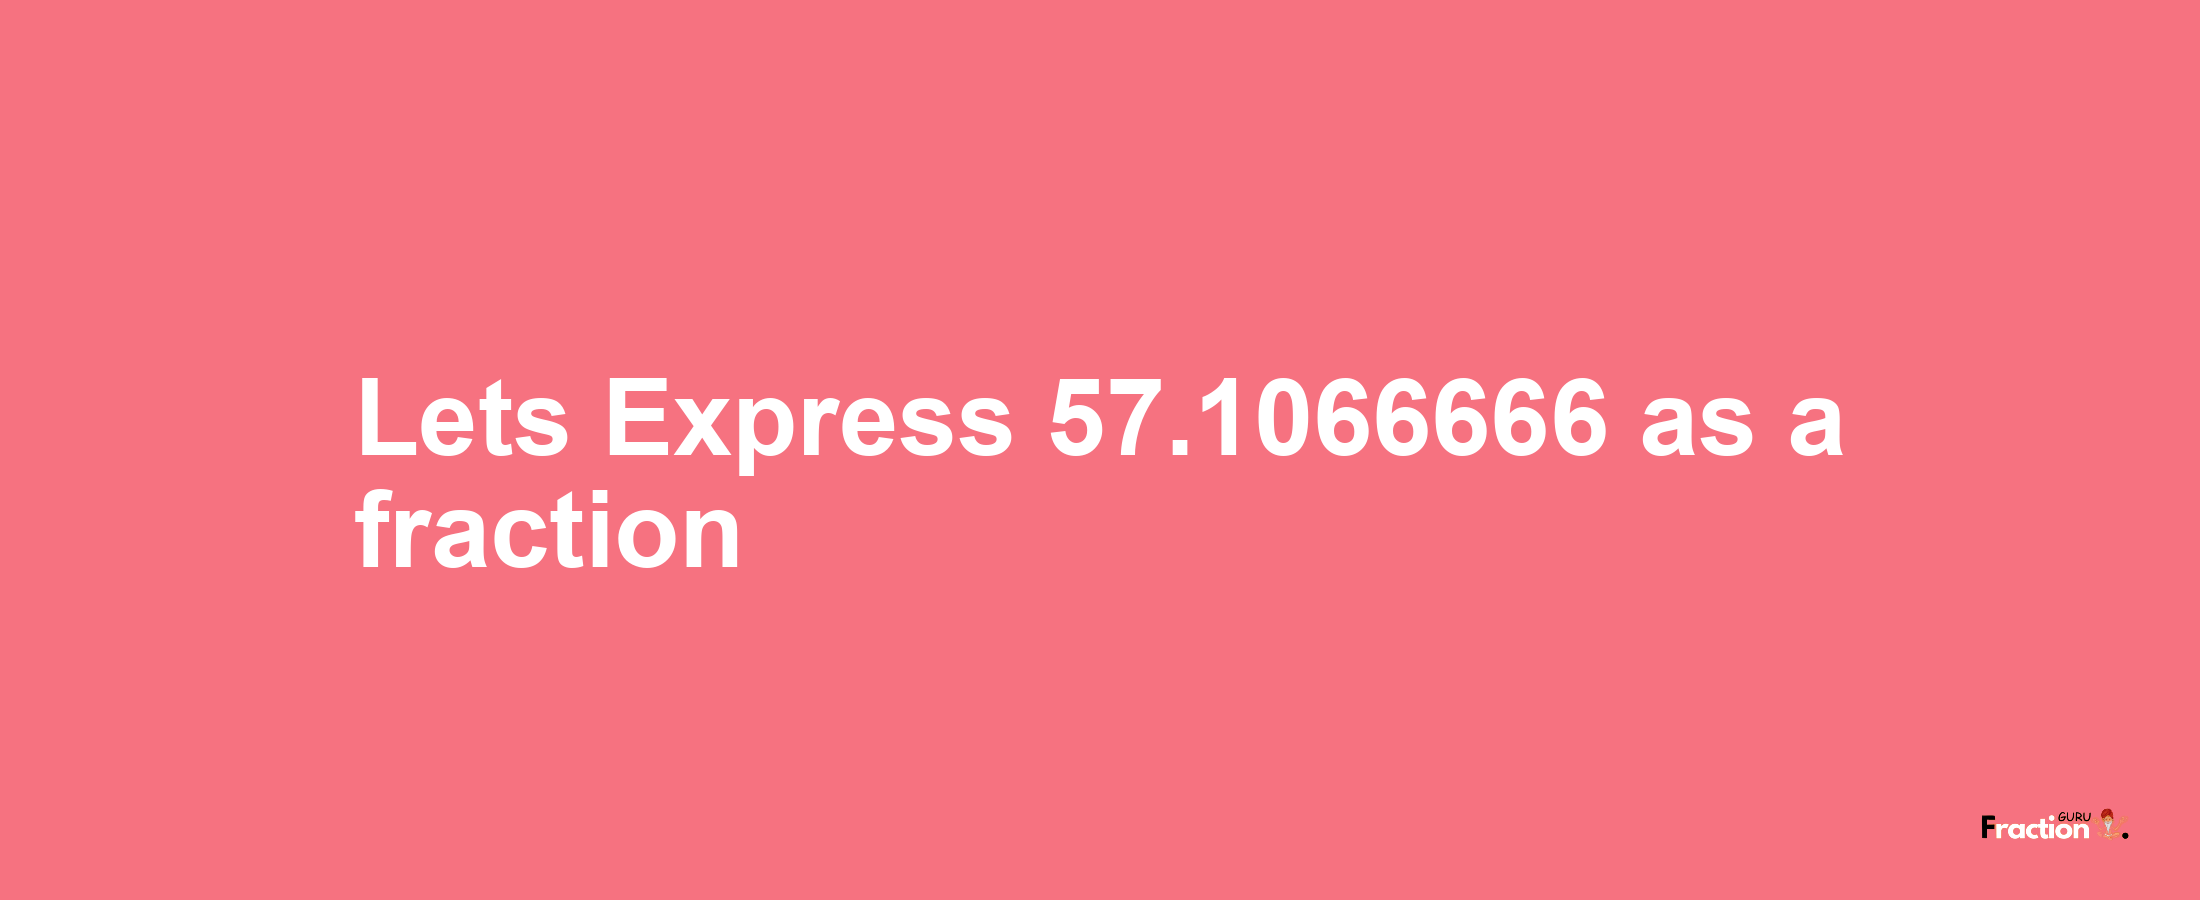 Lets Express 57.1066666 as afraction